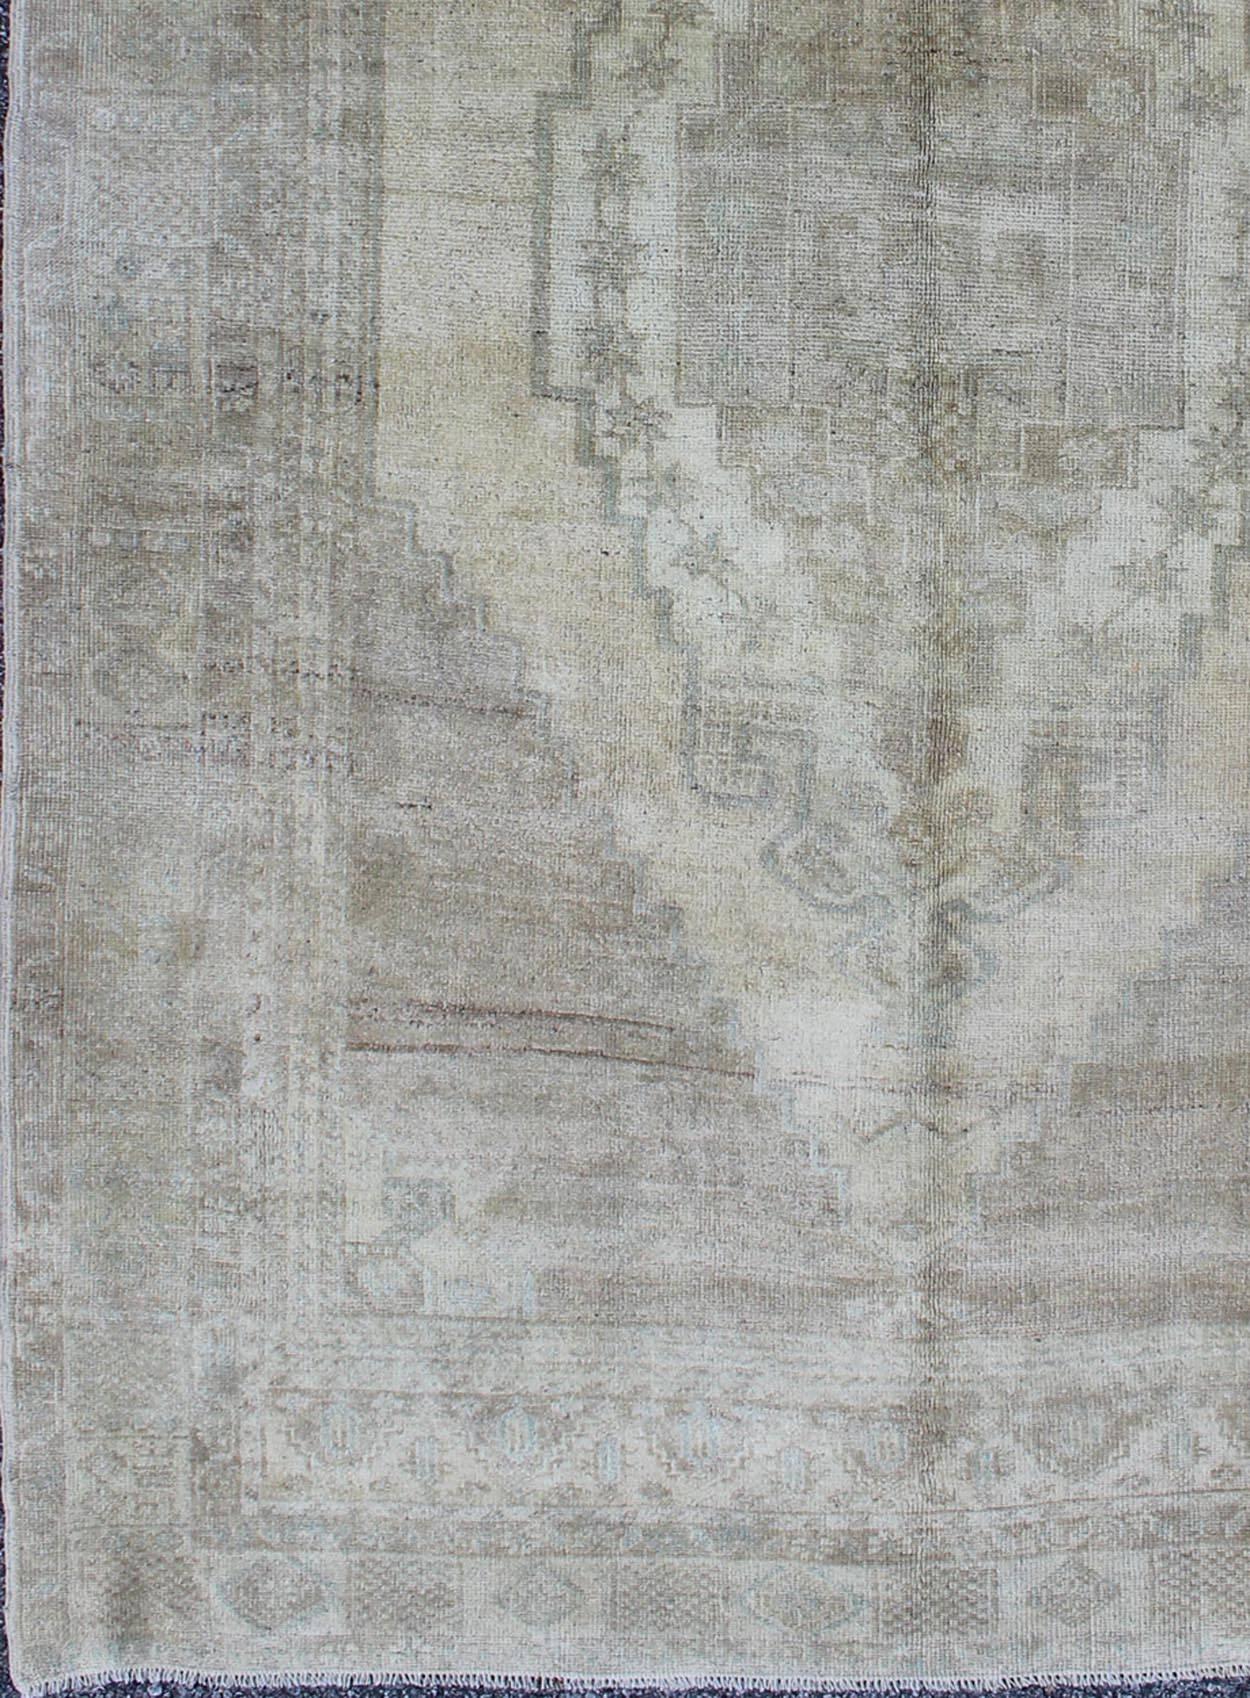 Shades of gray Oushak vintage rug from Turkey with layered medallion, rug en-94454, country of origin / type: Turkey / Oushak, circa 1940

This muted vintage Turkish Oushak carpet rests beautifully on a grounded gray field. A multi-layered medallion